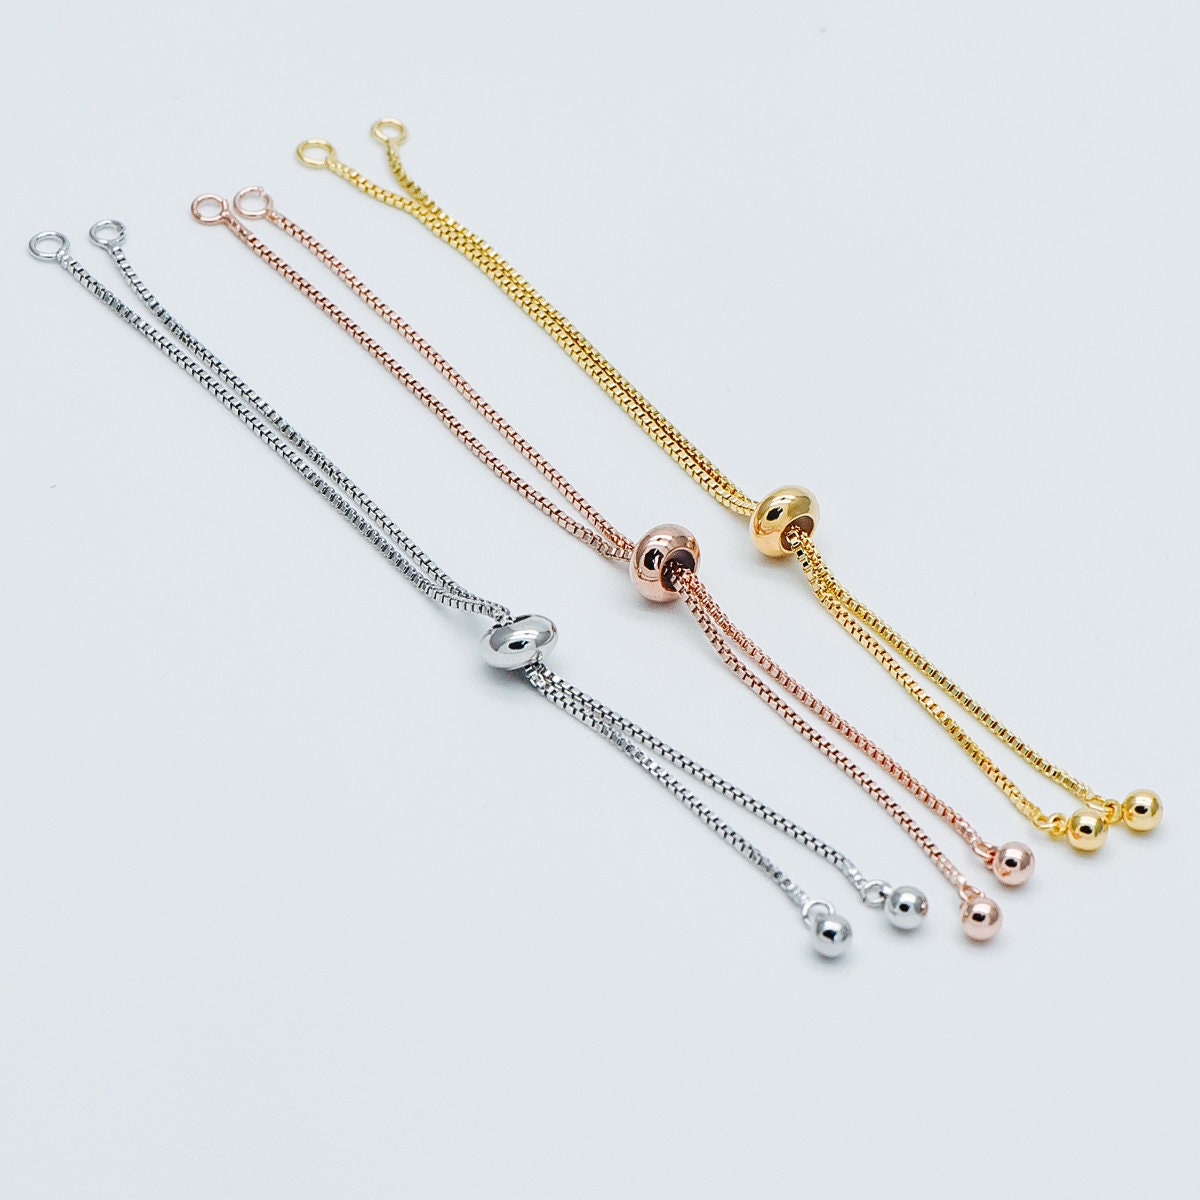 ROSE GOLD PLATED CRYSTAL SAFETY CHAIN STOPPER FOR BRACELET 